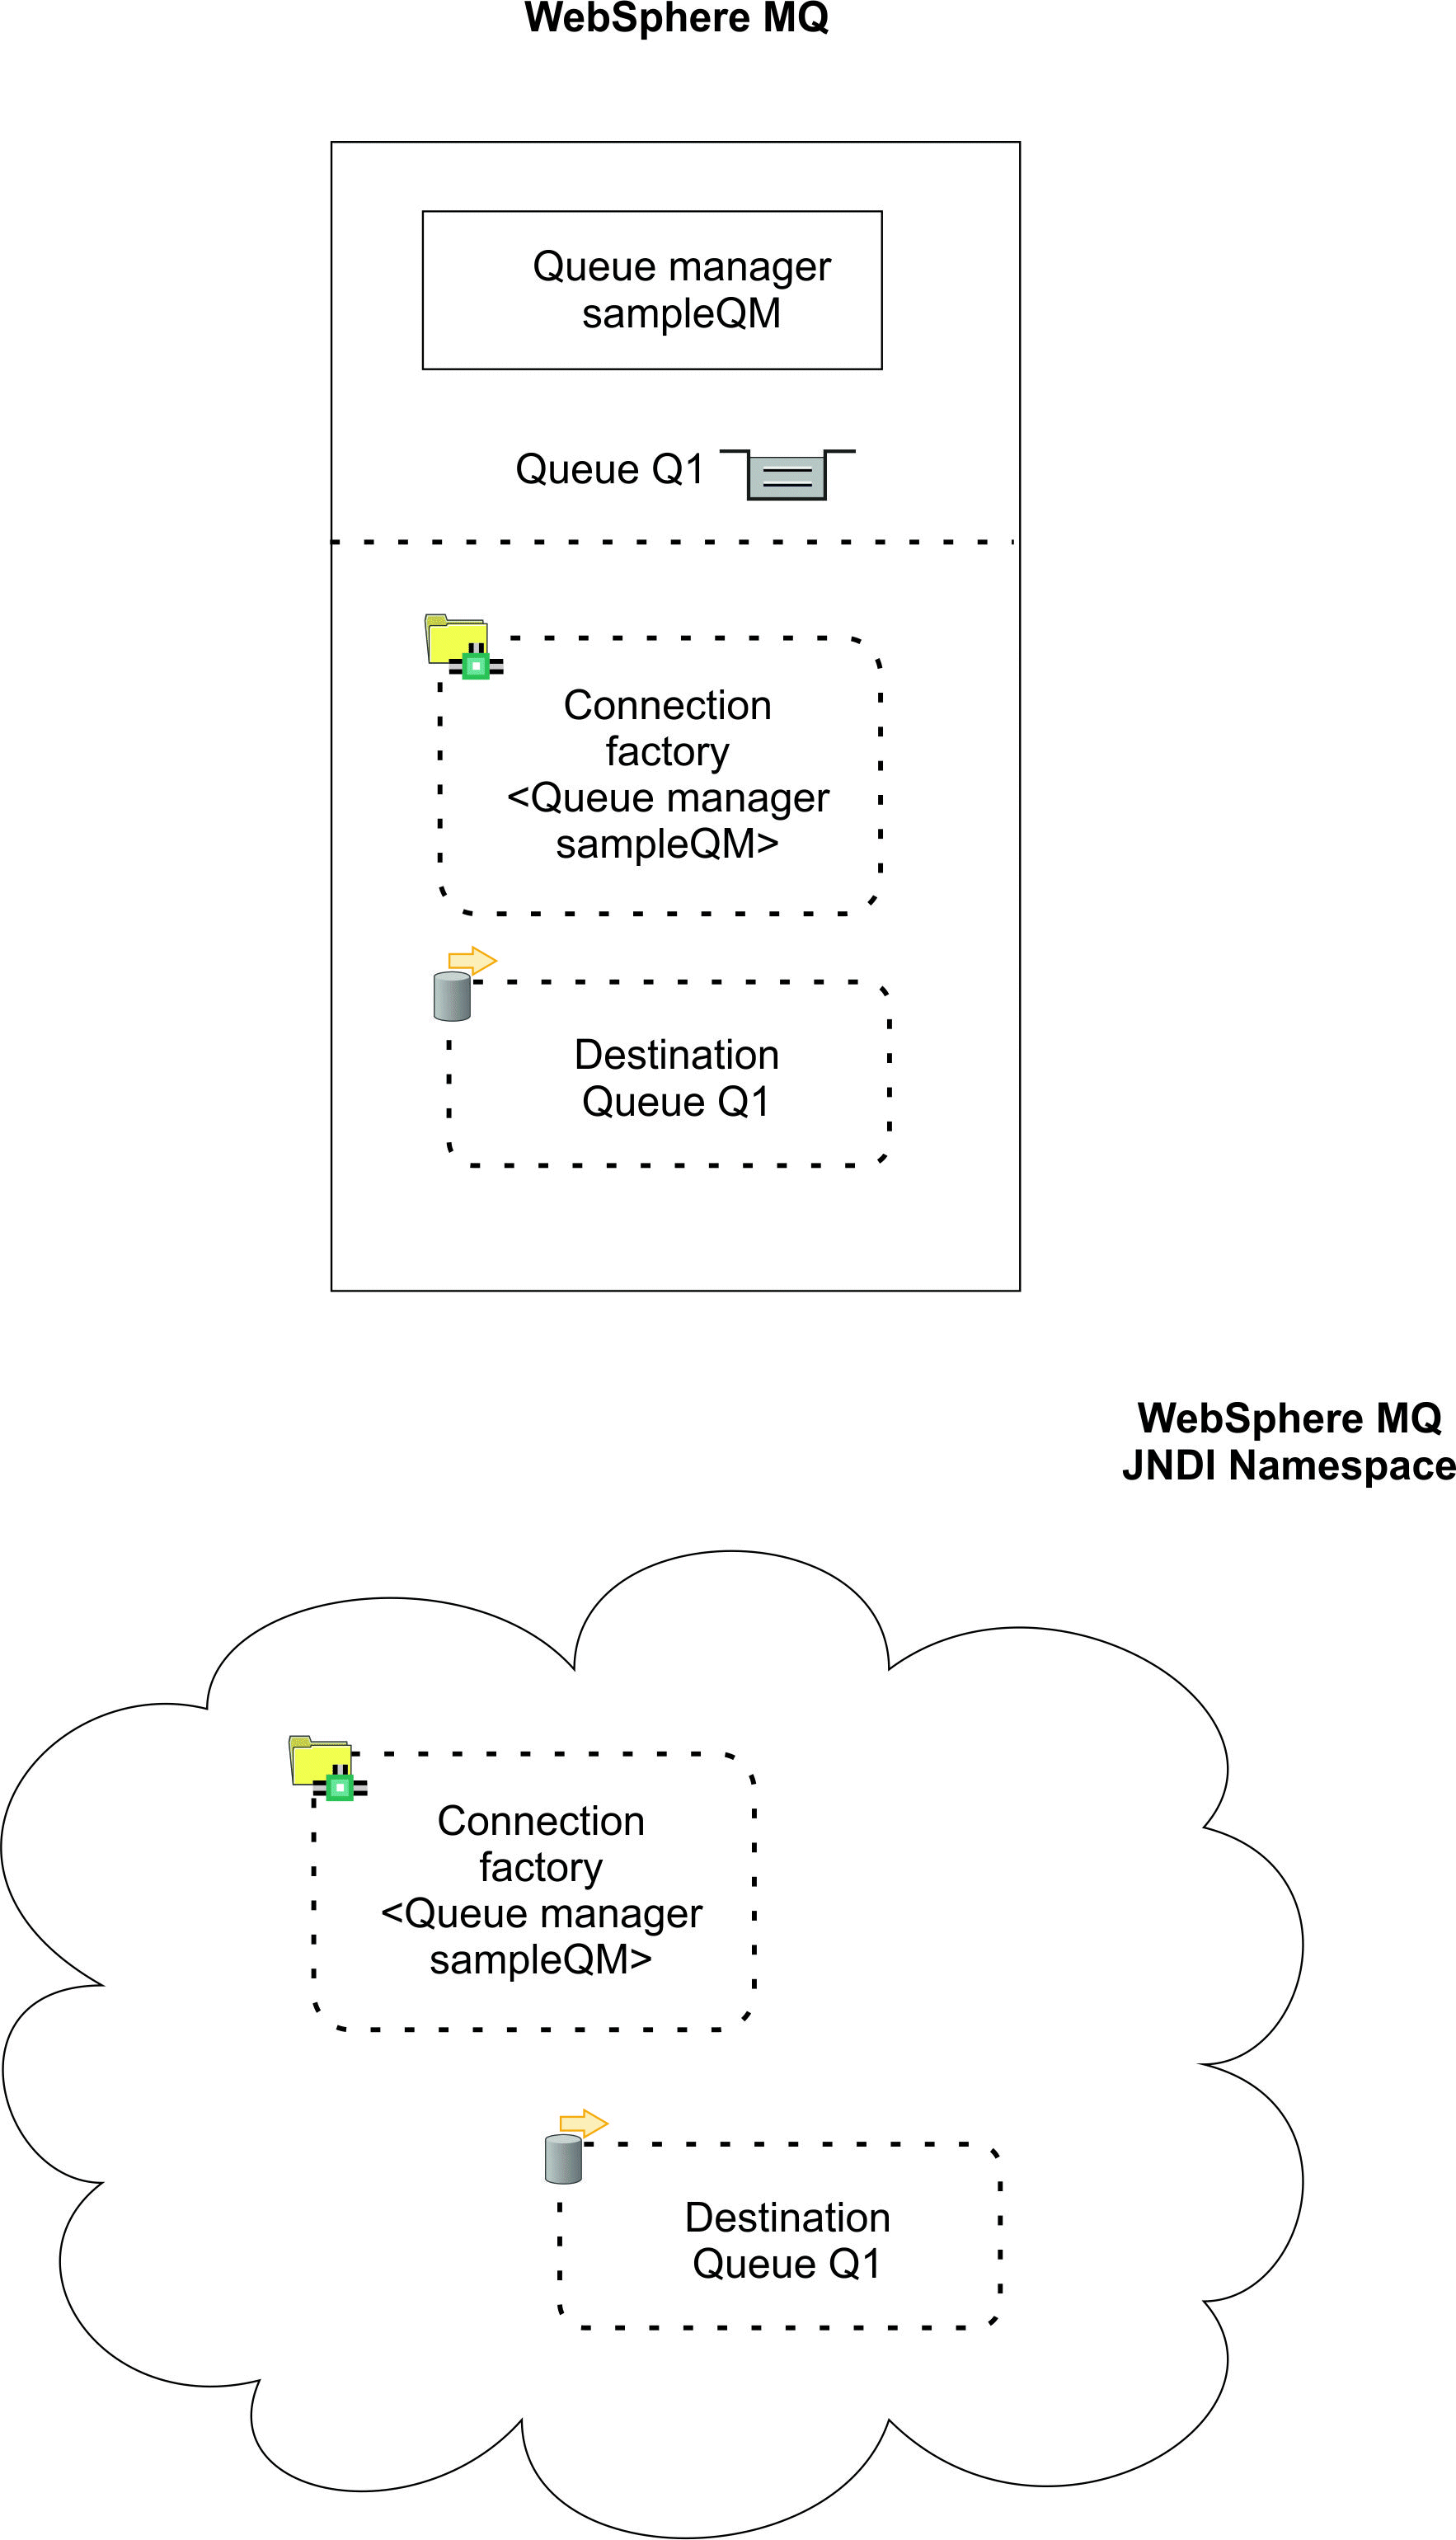 This image shows a queue manager and a queue in IBM MQ. The JMS layer within IBM MQ contains a connection factory and a destination. Outside IBM MQ is a JNDI namespace where the JMS objects: connection factory and destination, are stored.